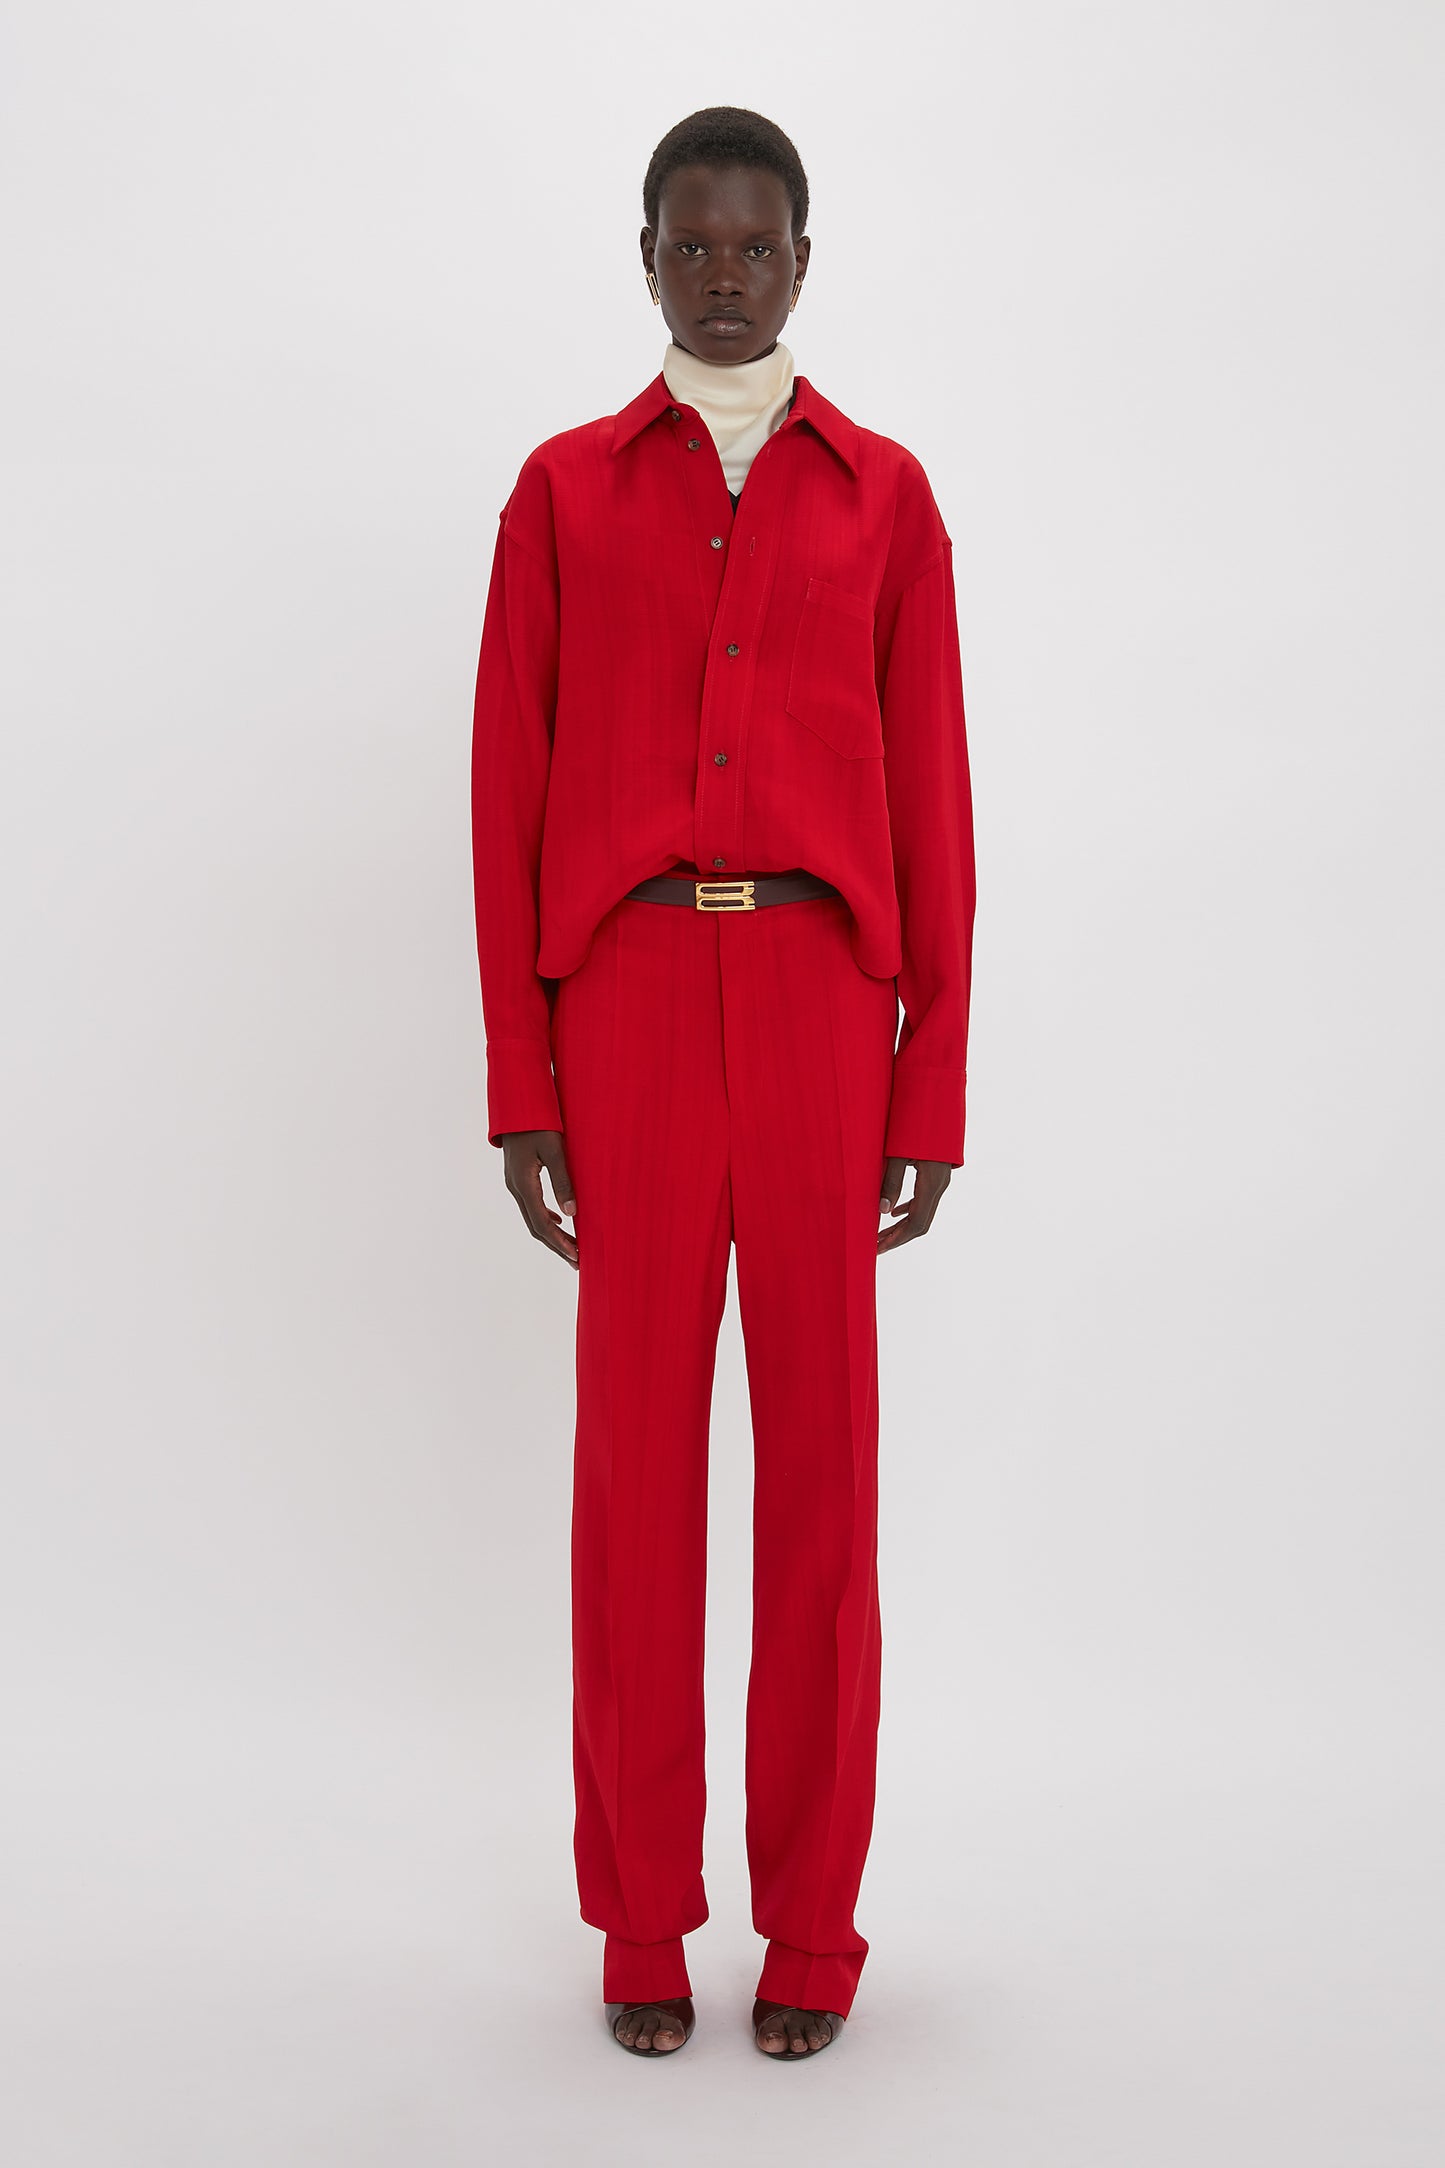 A person stands against a plain backdrop wearing a Victoria Beckham Cropped Long Sleeve Shirt In Carmine and matching red pants, with a white turtleneck shirt visible underneath. The ensemble features a masculine-inspired shirt design that adds an edge to the sophisticated look.